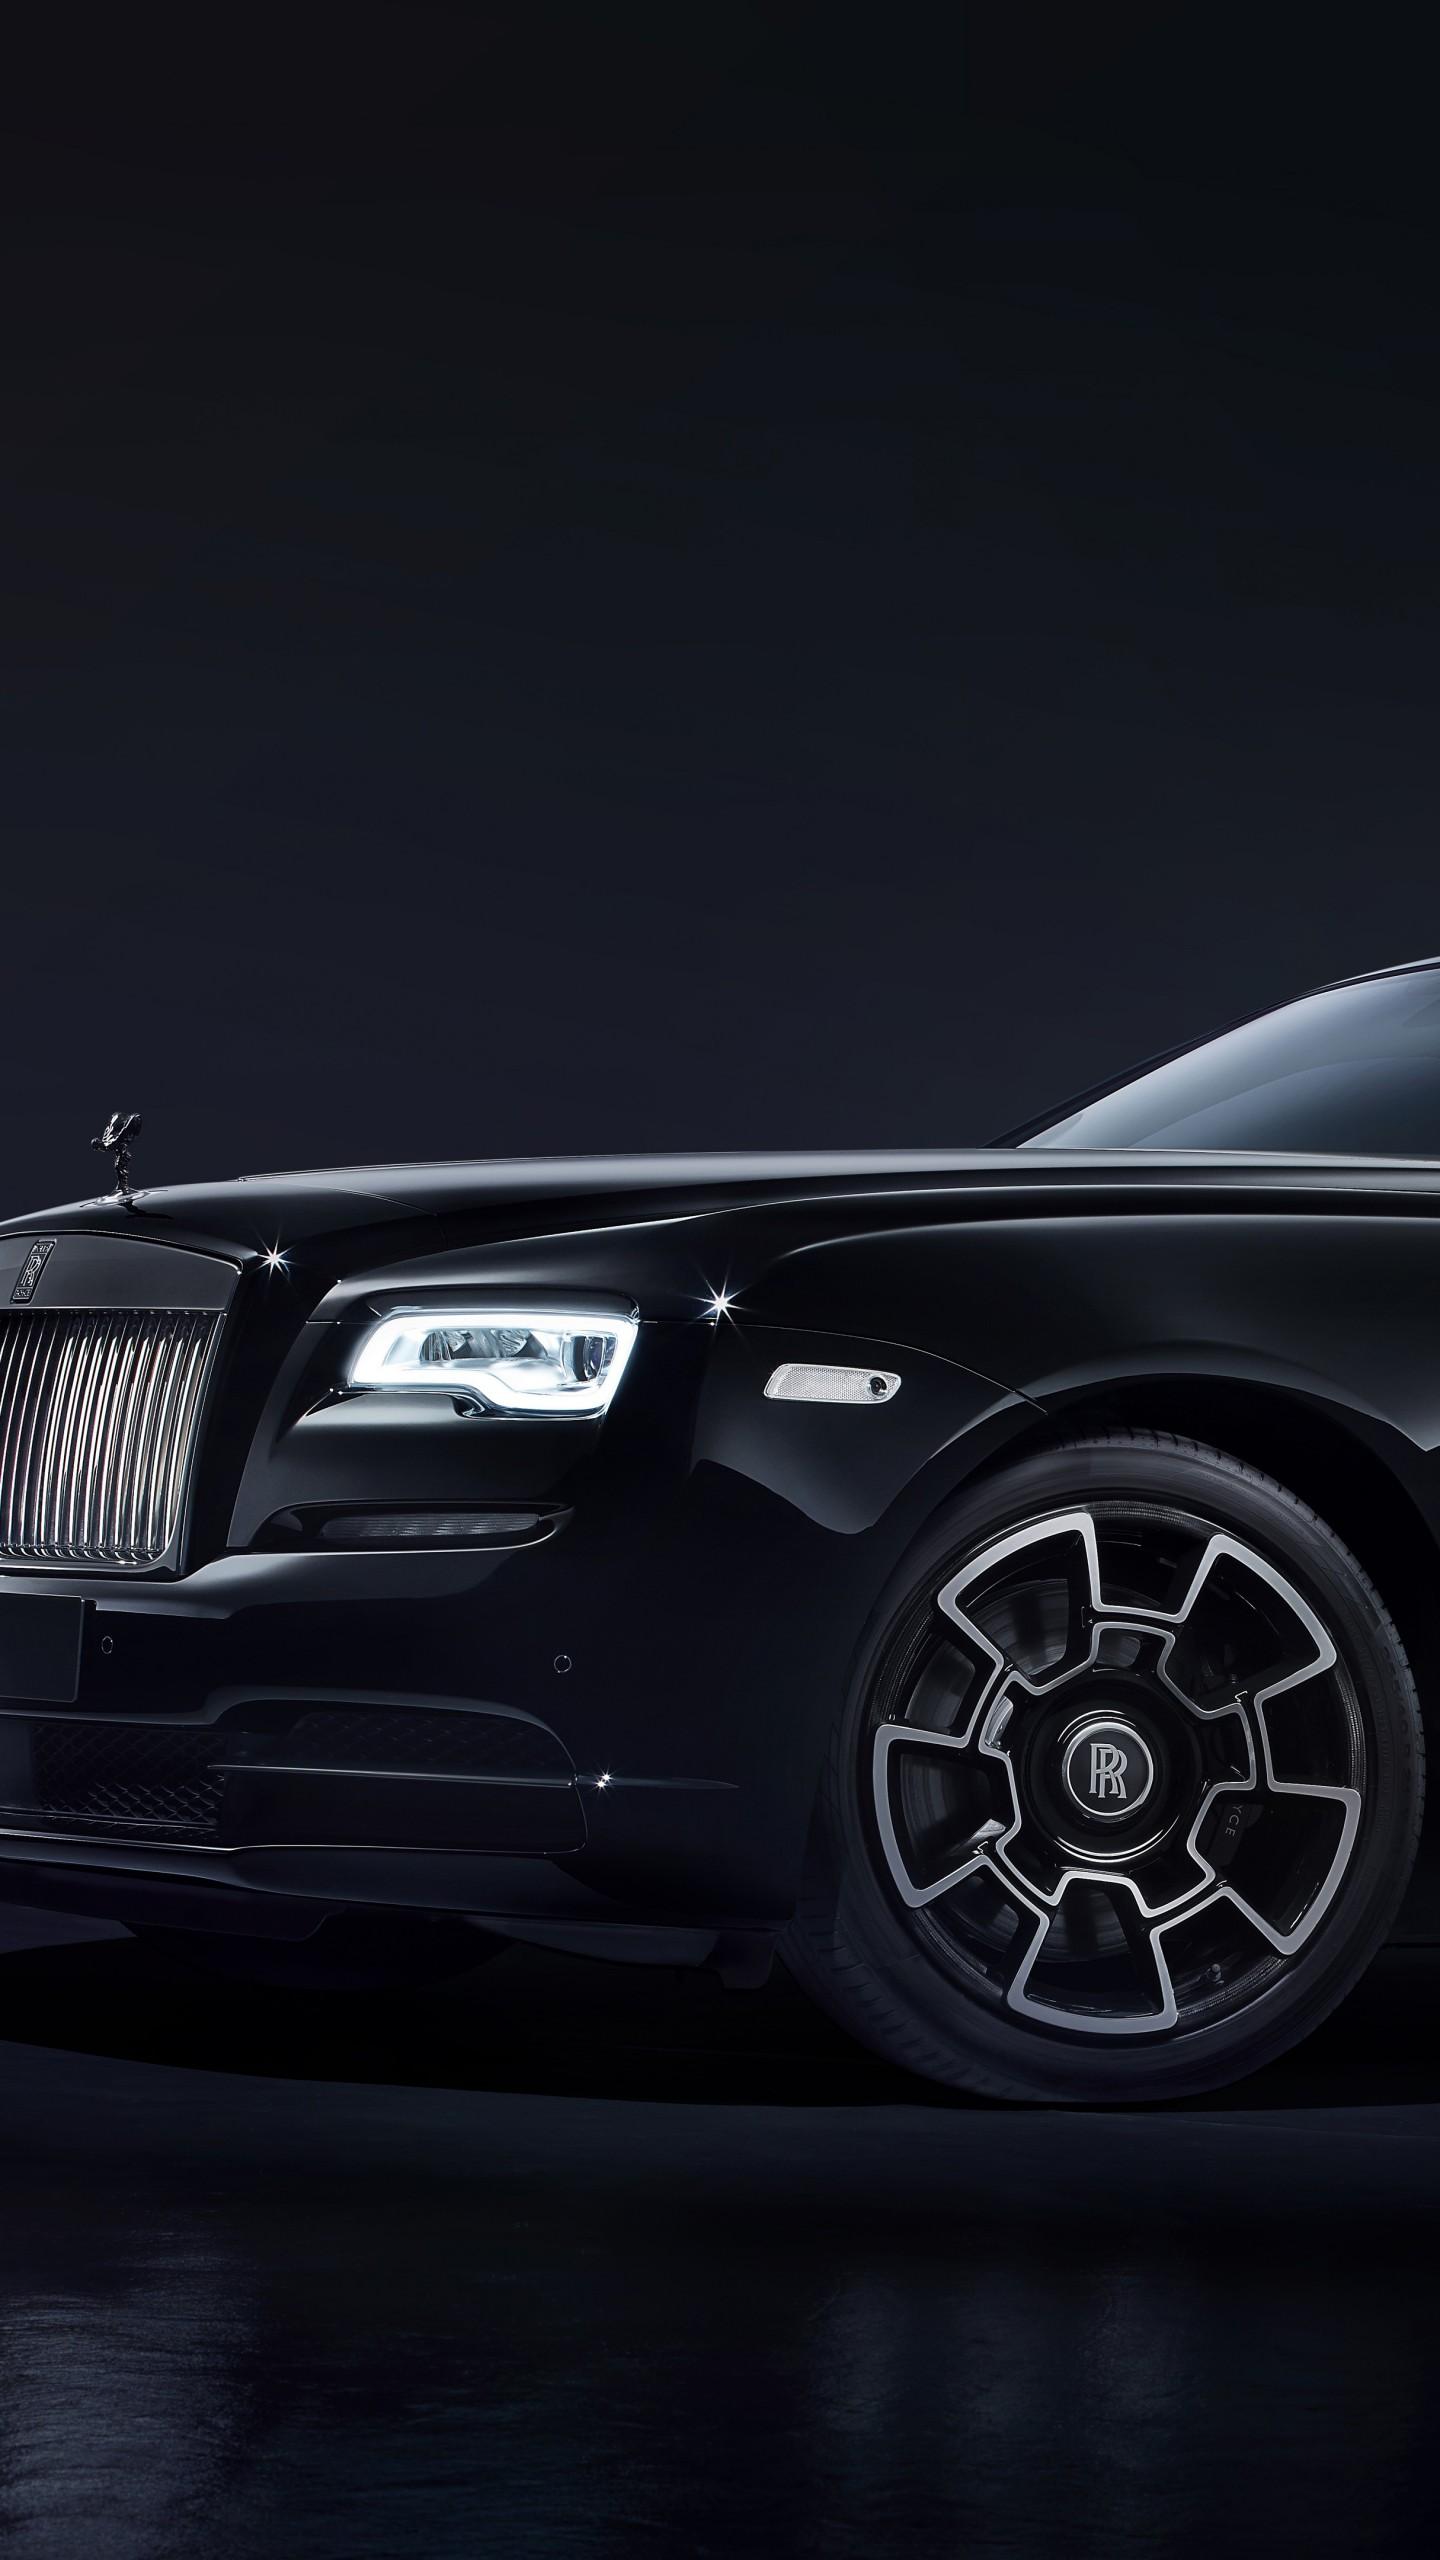 Wallpaper Rolls Royce, Wraith Black Badge, 8K, Automotive / Cars,. Wallpaper For IPhone, Android, Mobile And Desktop